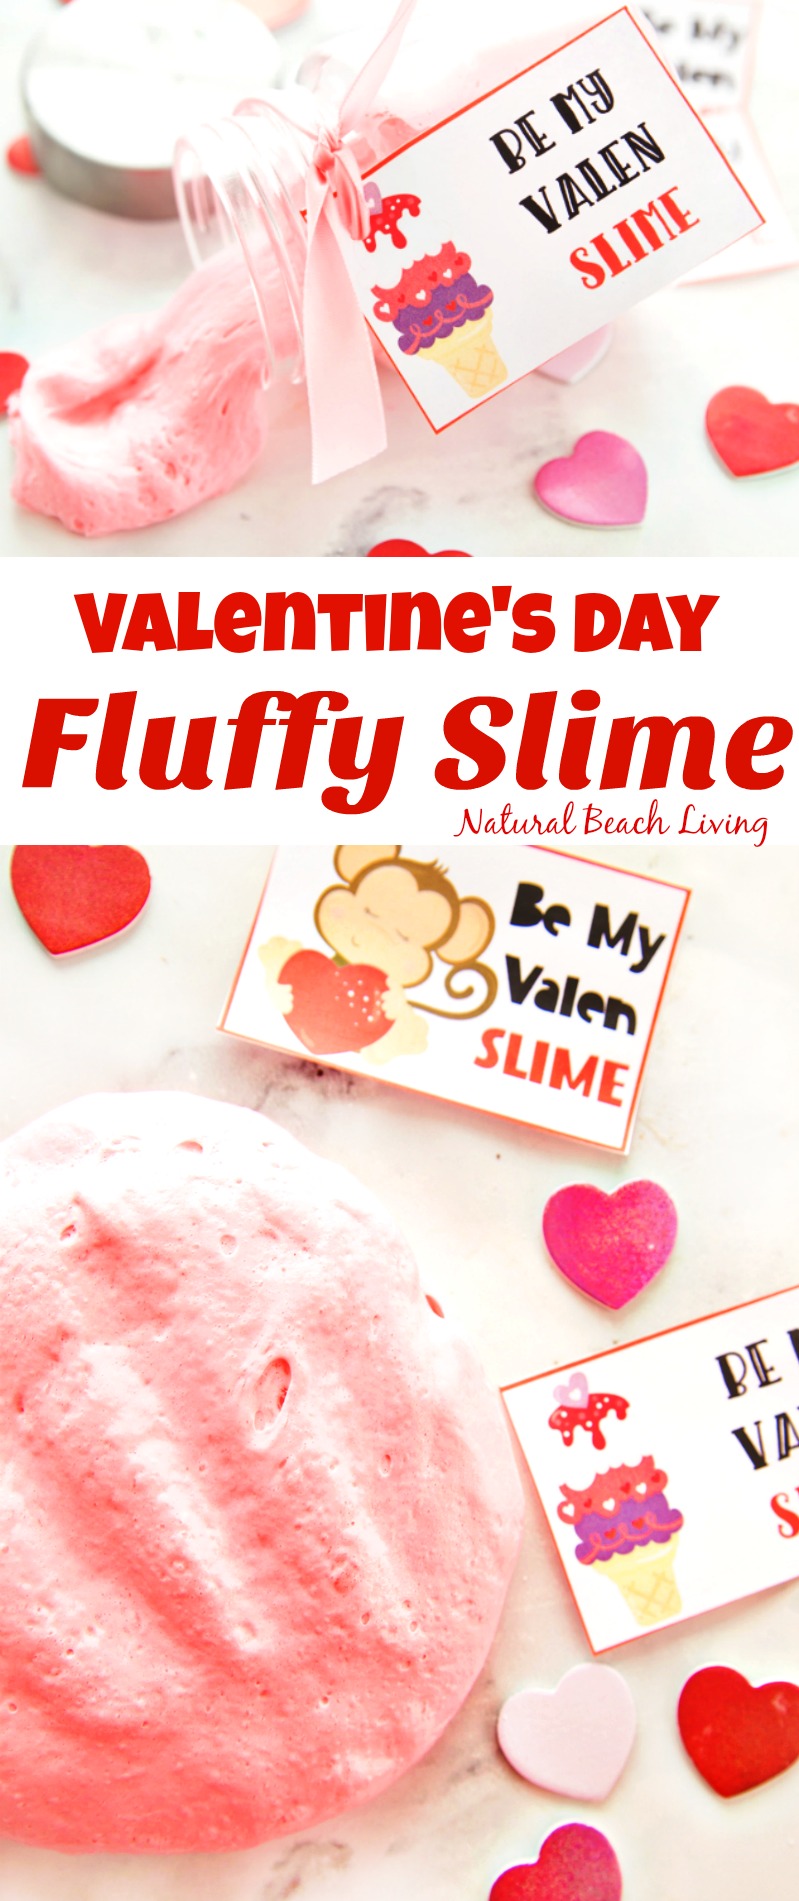  Here are over 25 Slime Recipes kids love. Fun Slime Recipes with Contact Solution, Slime Videos, Fluffy Slime Recipes with Contact Solution, THE BEST slime recipe with contact solution clear and Clear Slime recipe Ideas for Kids 